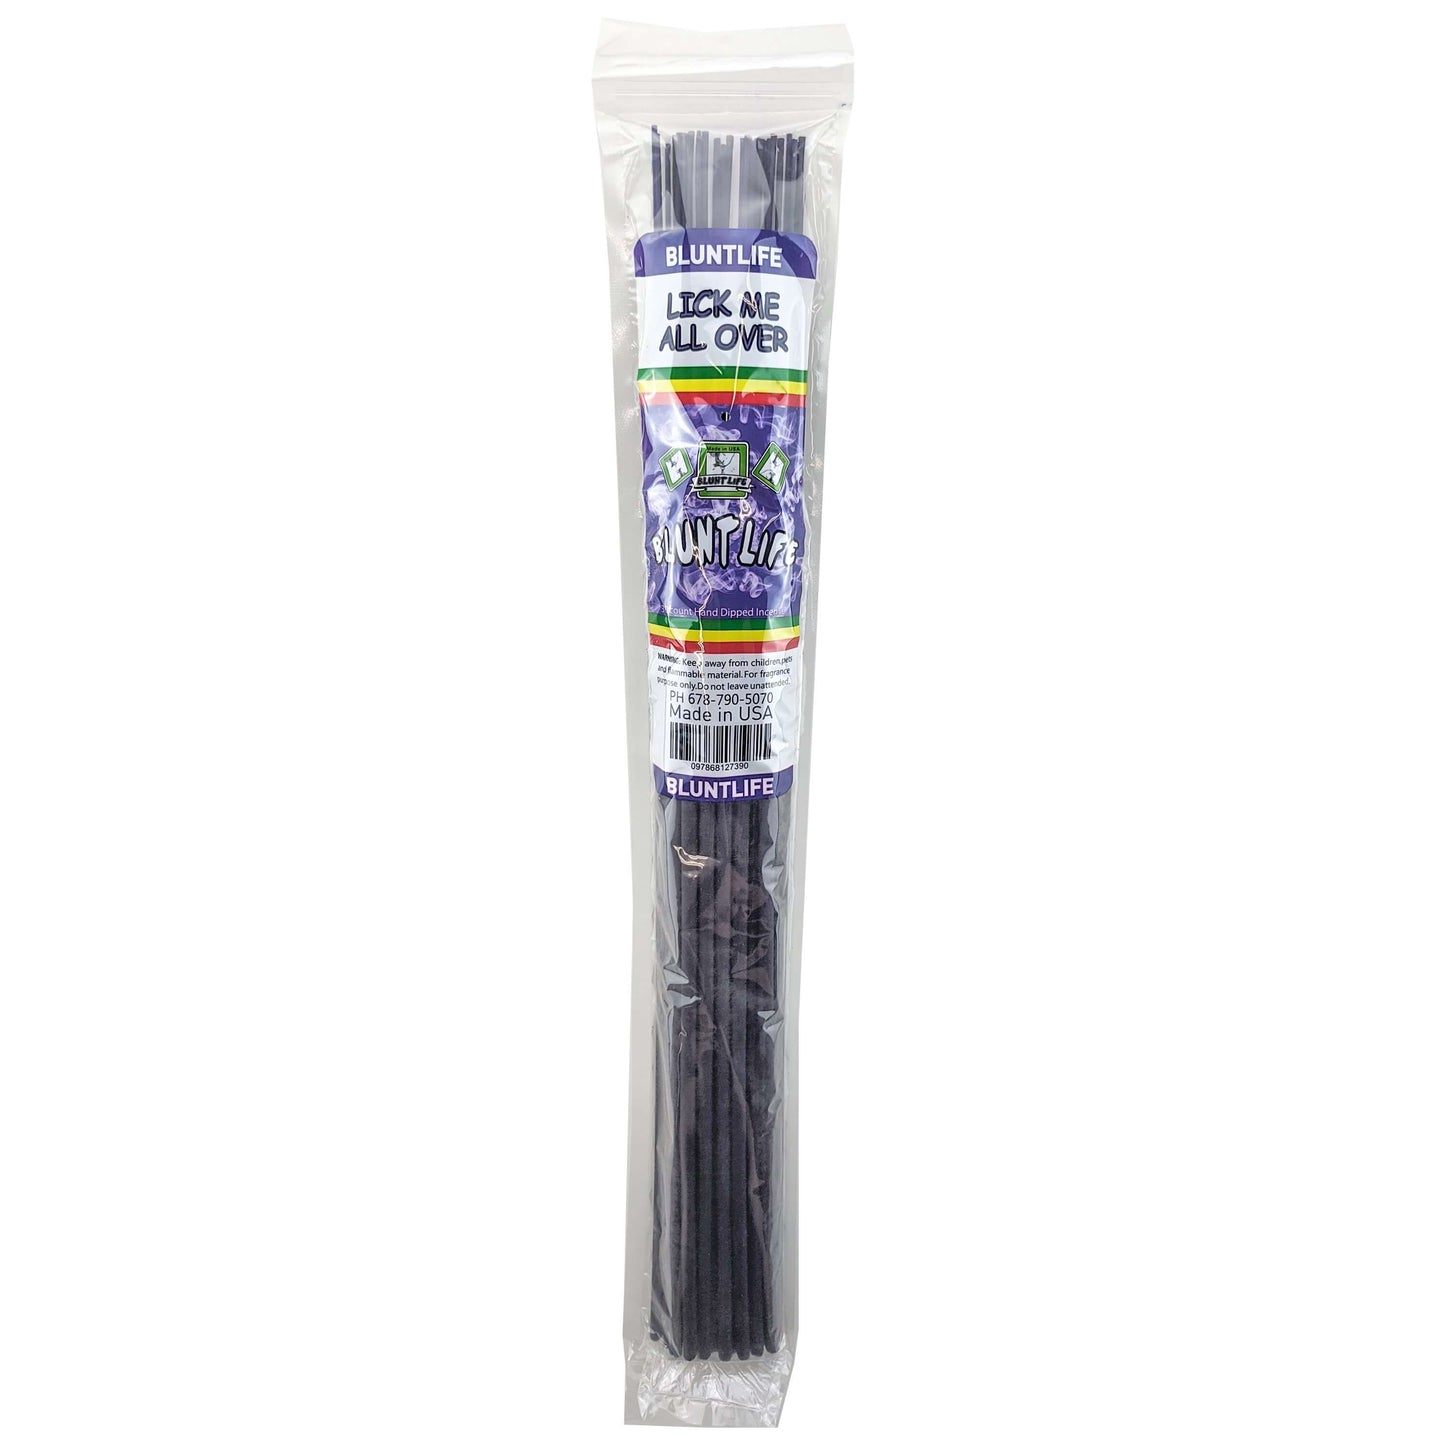 Lick Me All Over Scent 19" BluntLife Jumbo Incense, 30-Stick Pack